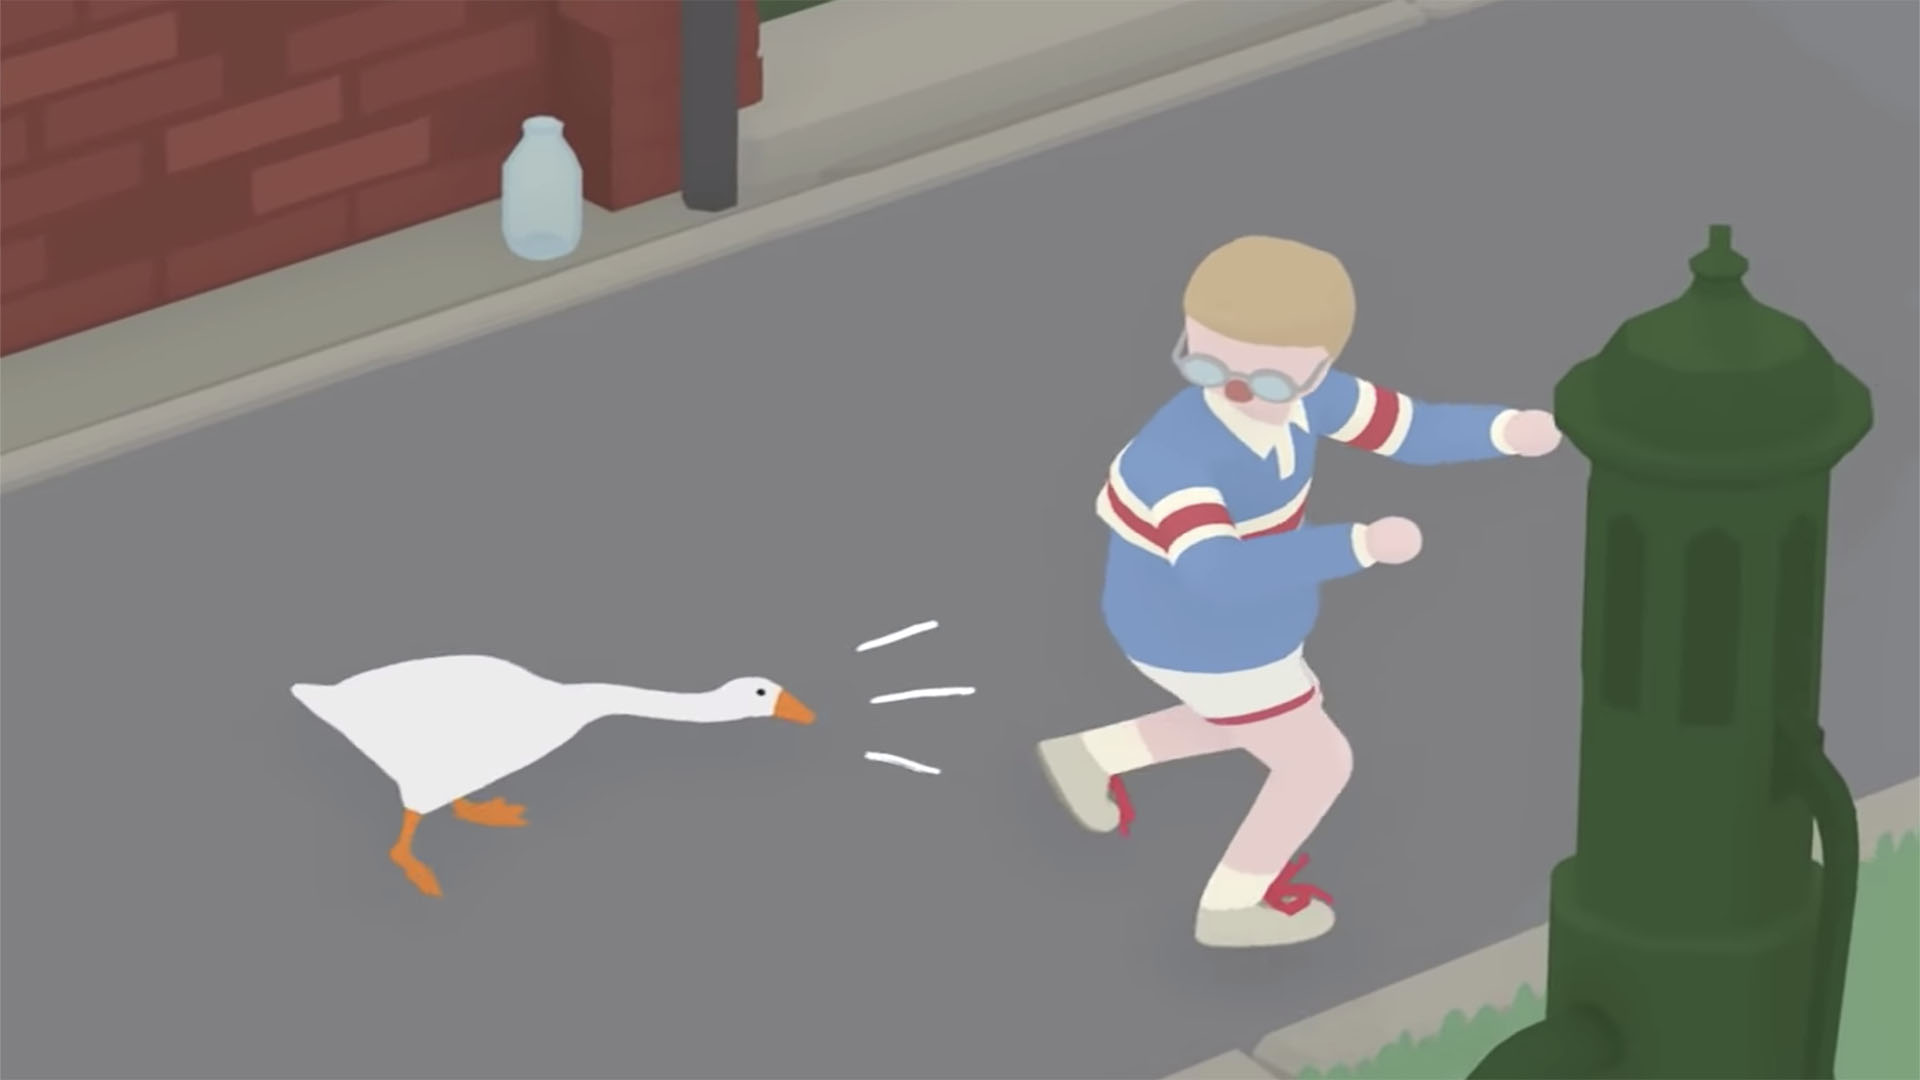 Untitled Goose Game gets the goosiest of all launch trailers ...